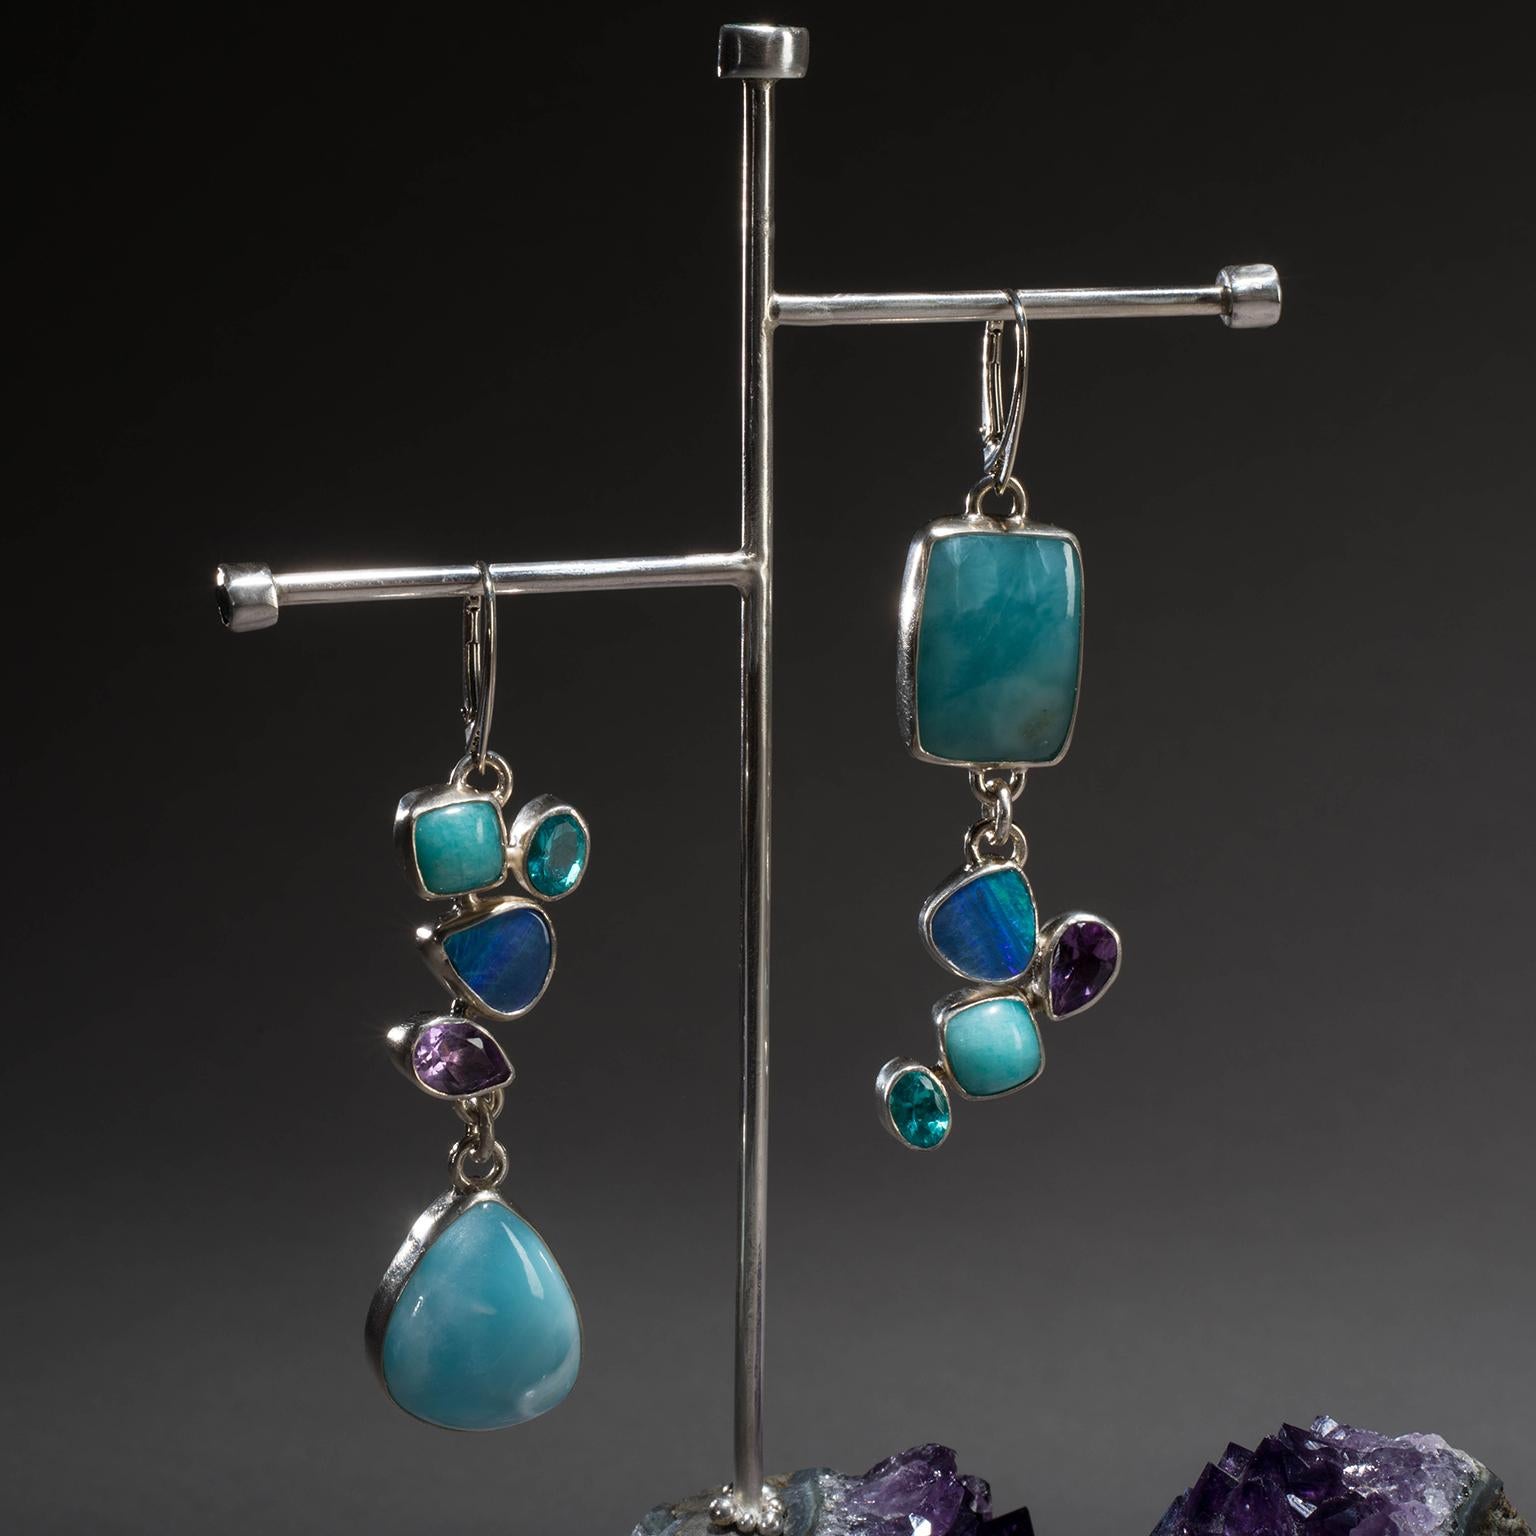 LARIMAR EARRINGS ON AMETHYST

No other stone so completely captures the exact teal and turquoise shades of the sea as larimar. Born of the volcanic activity that created the Caribbean and found only in the Dominican Republic, these soothing stones